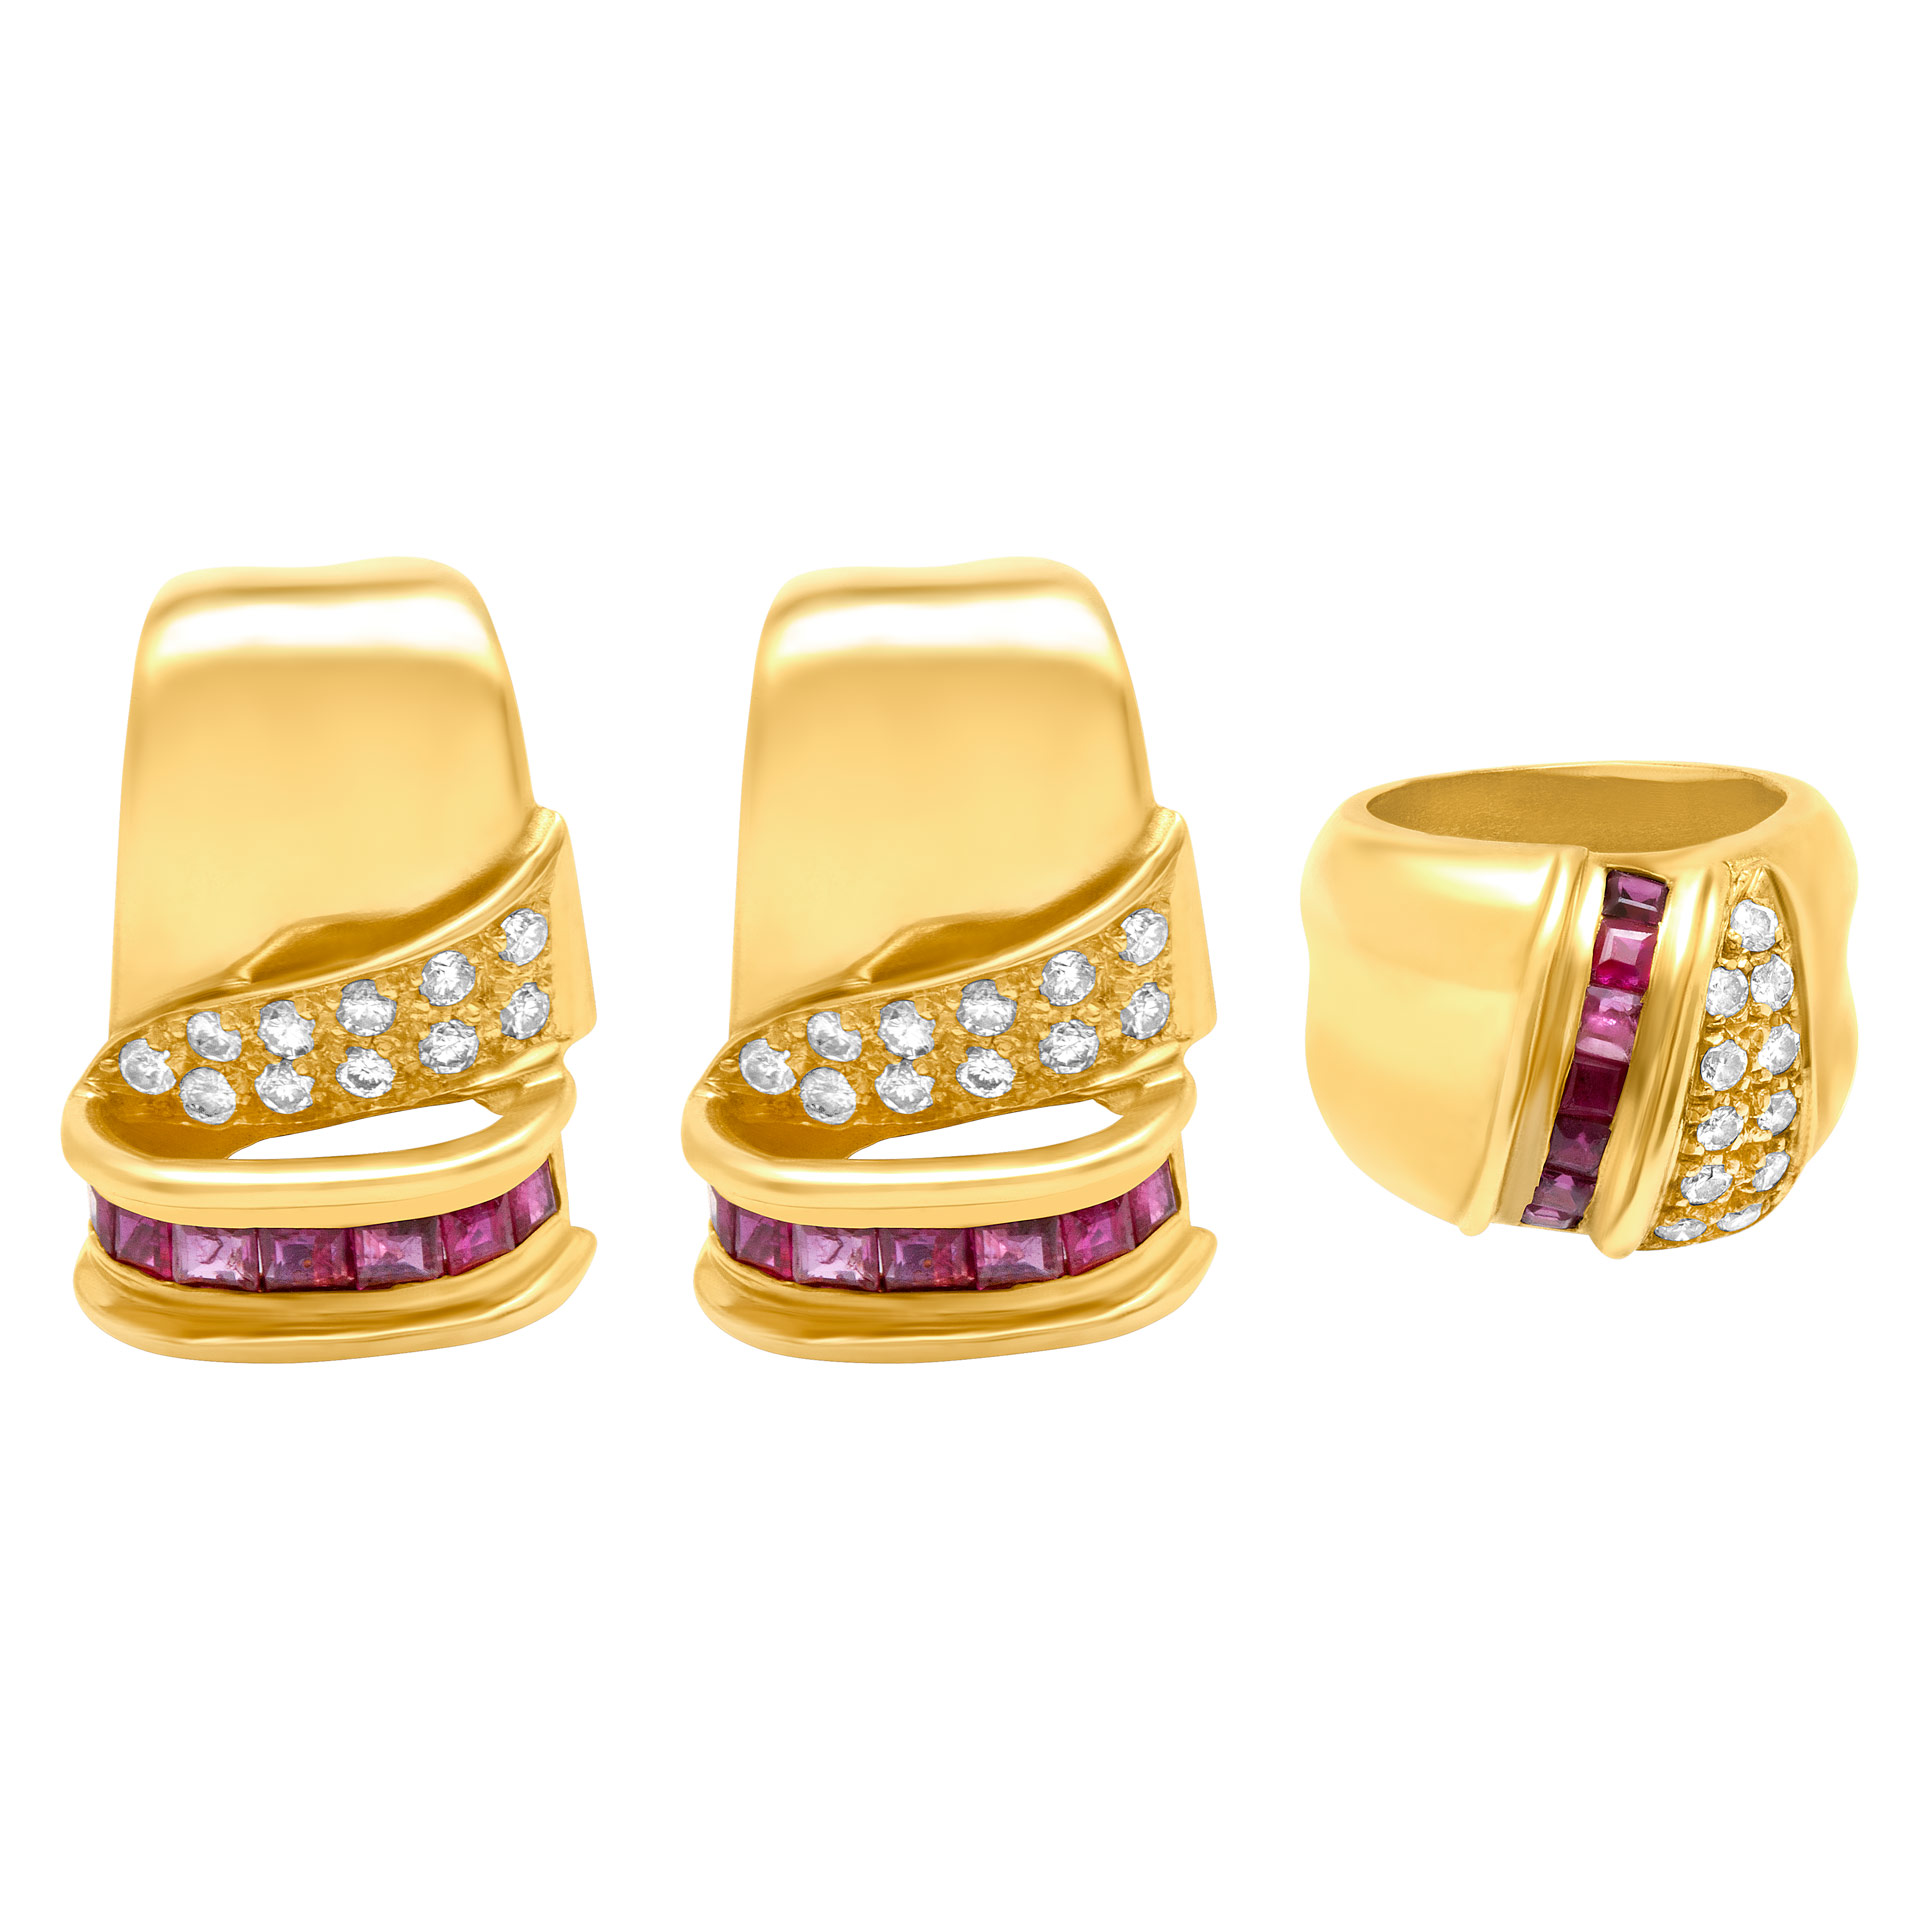 Waves of diamonds and rubies set of earrings and ring in 18k. 1.00cts in dias